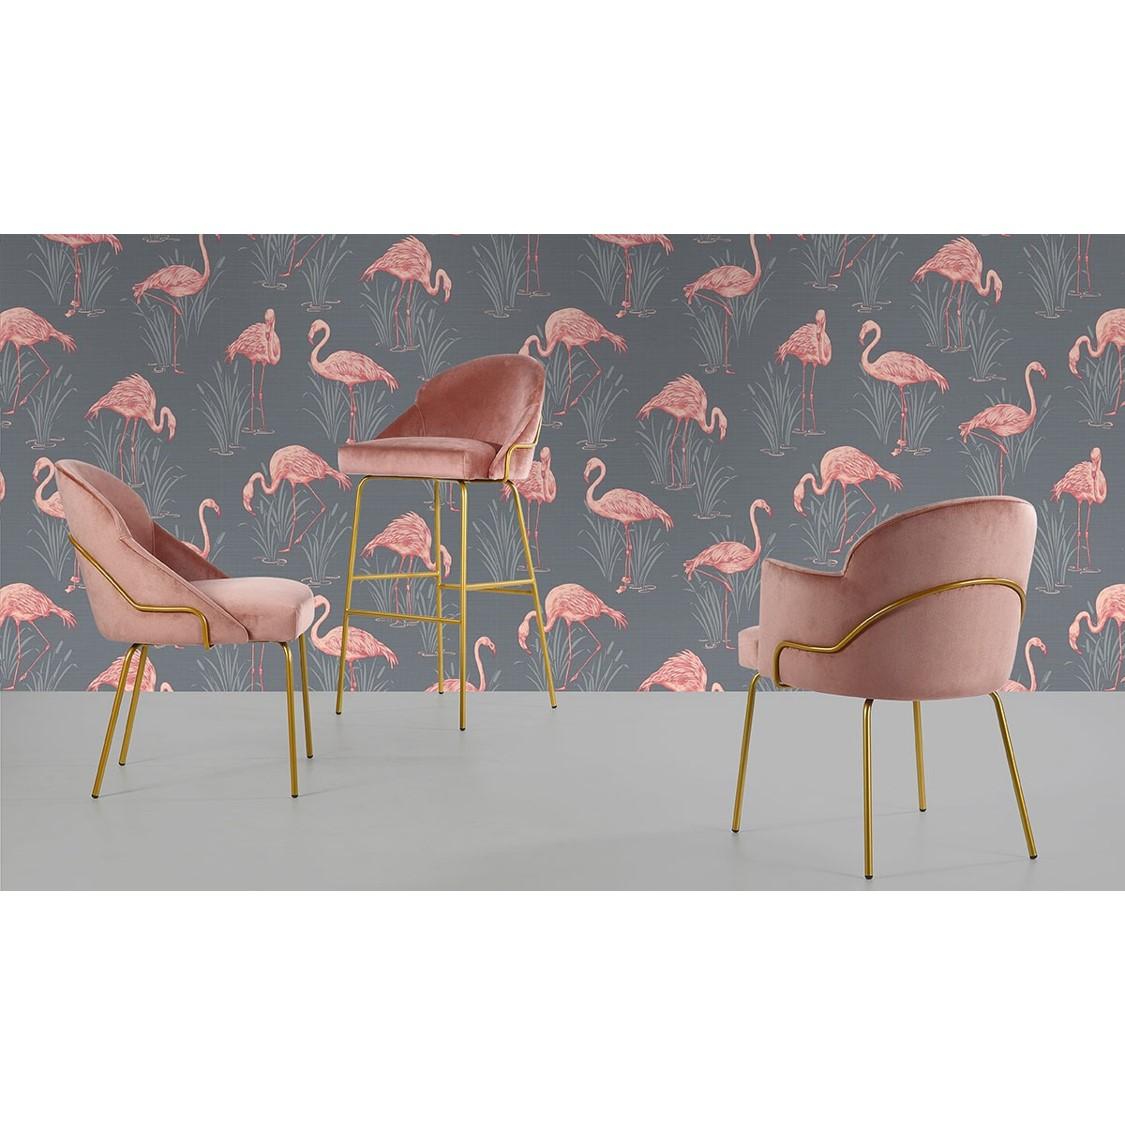 upholstered modern dining chairs